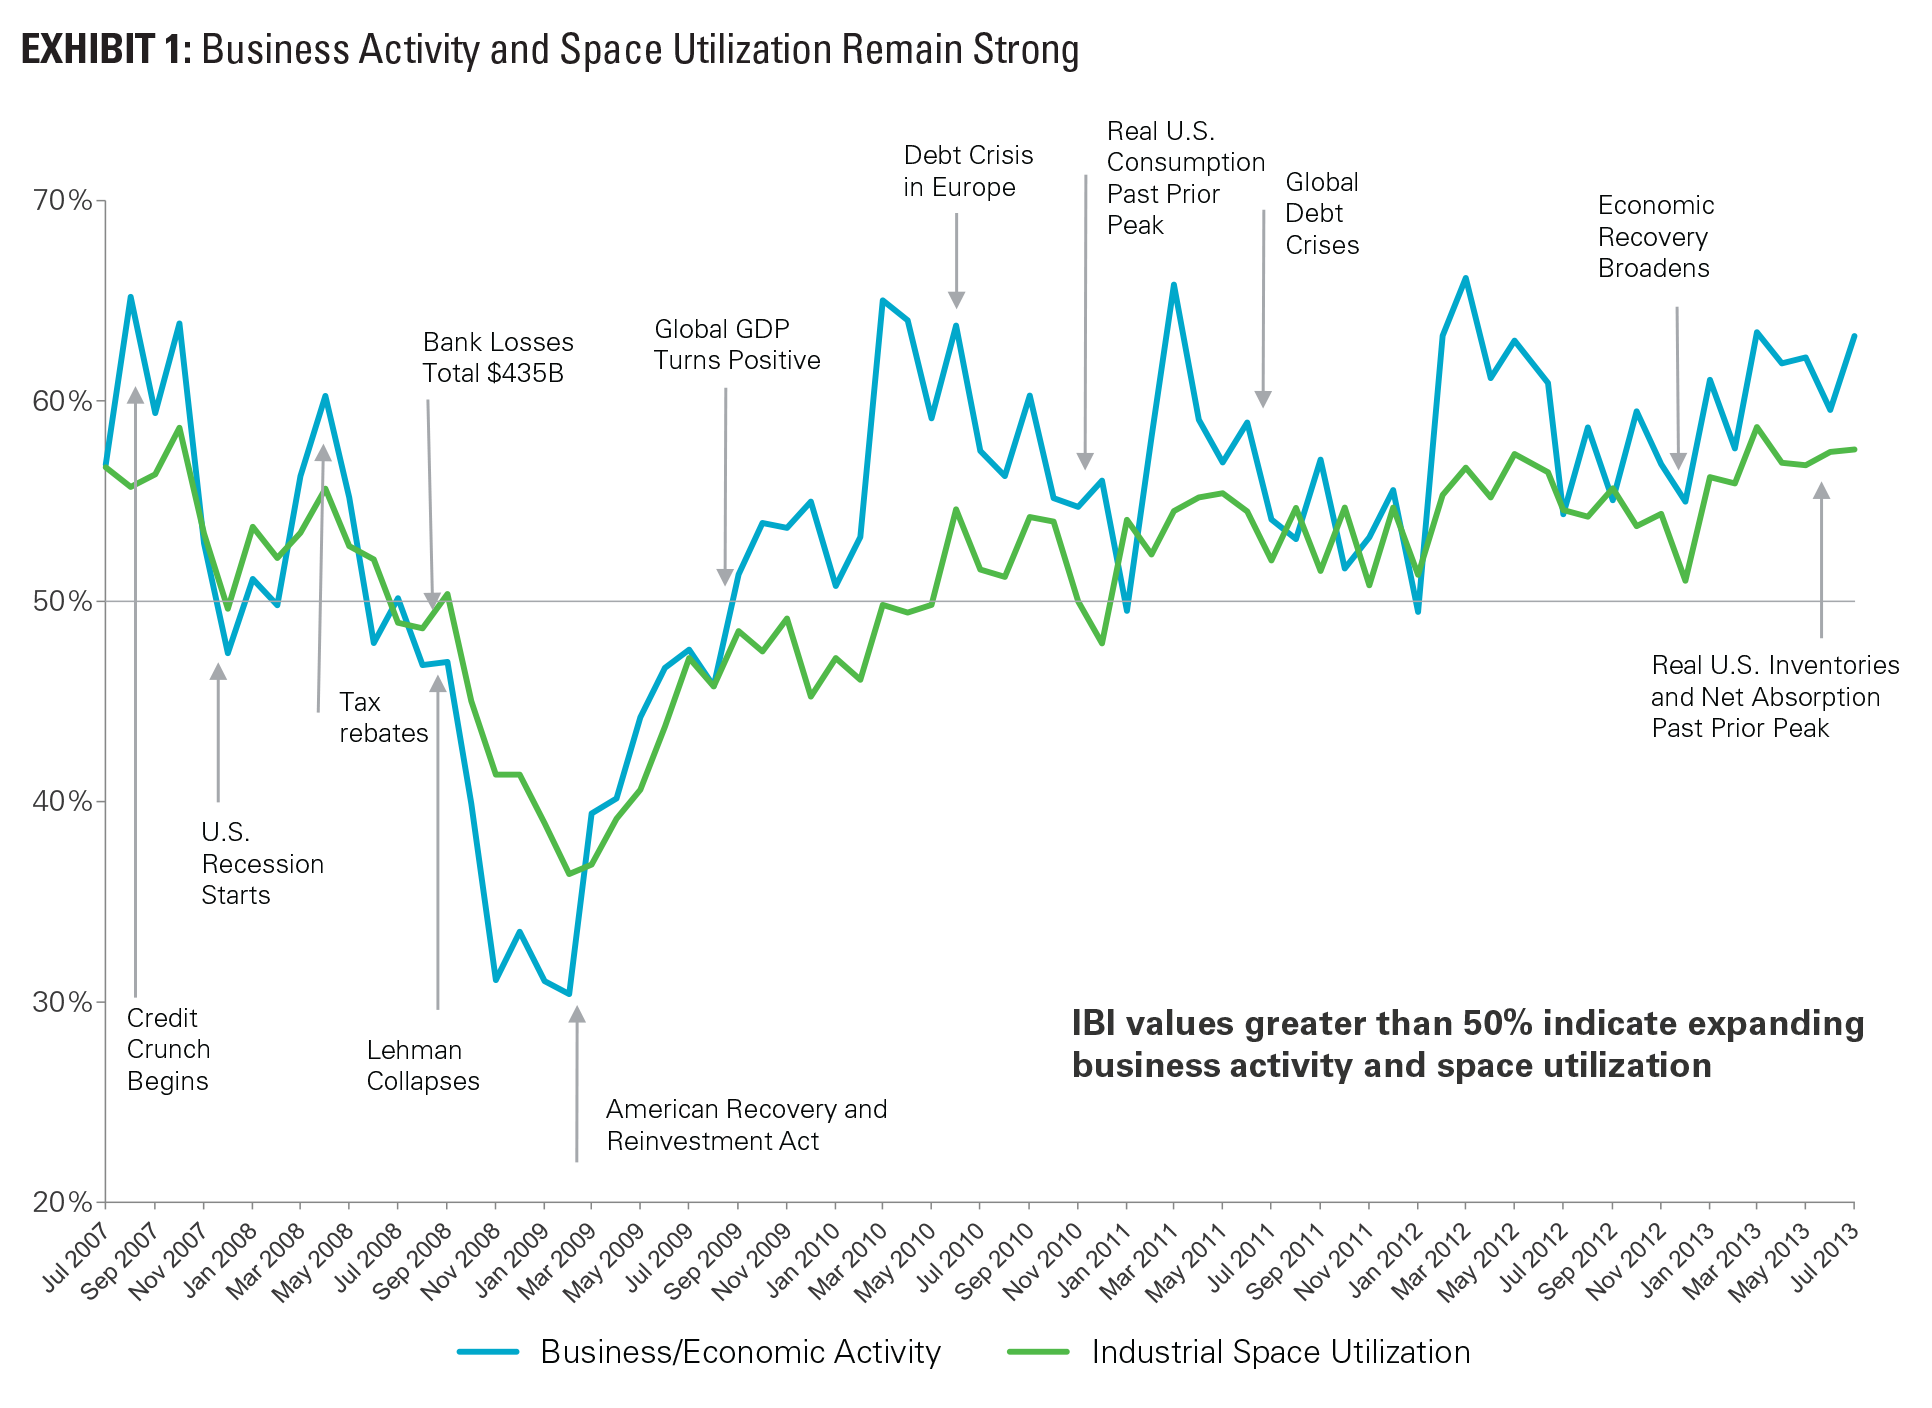 EXHIBIT 1: Business Activity and Space Utilization Remain Strong